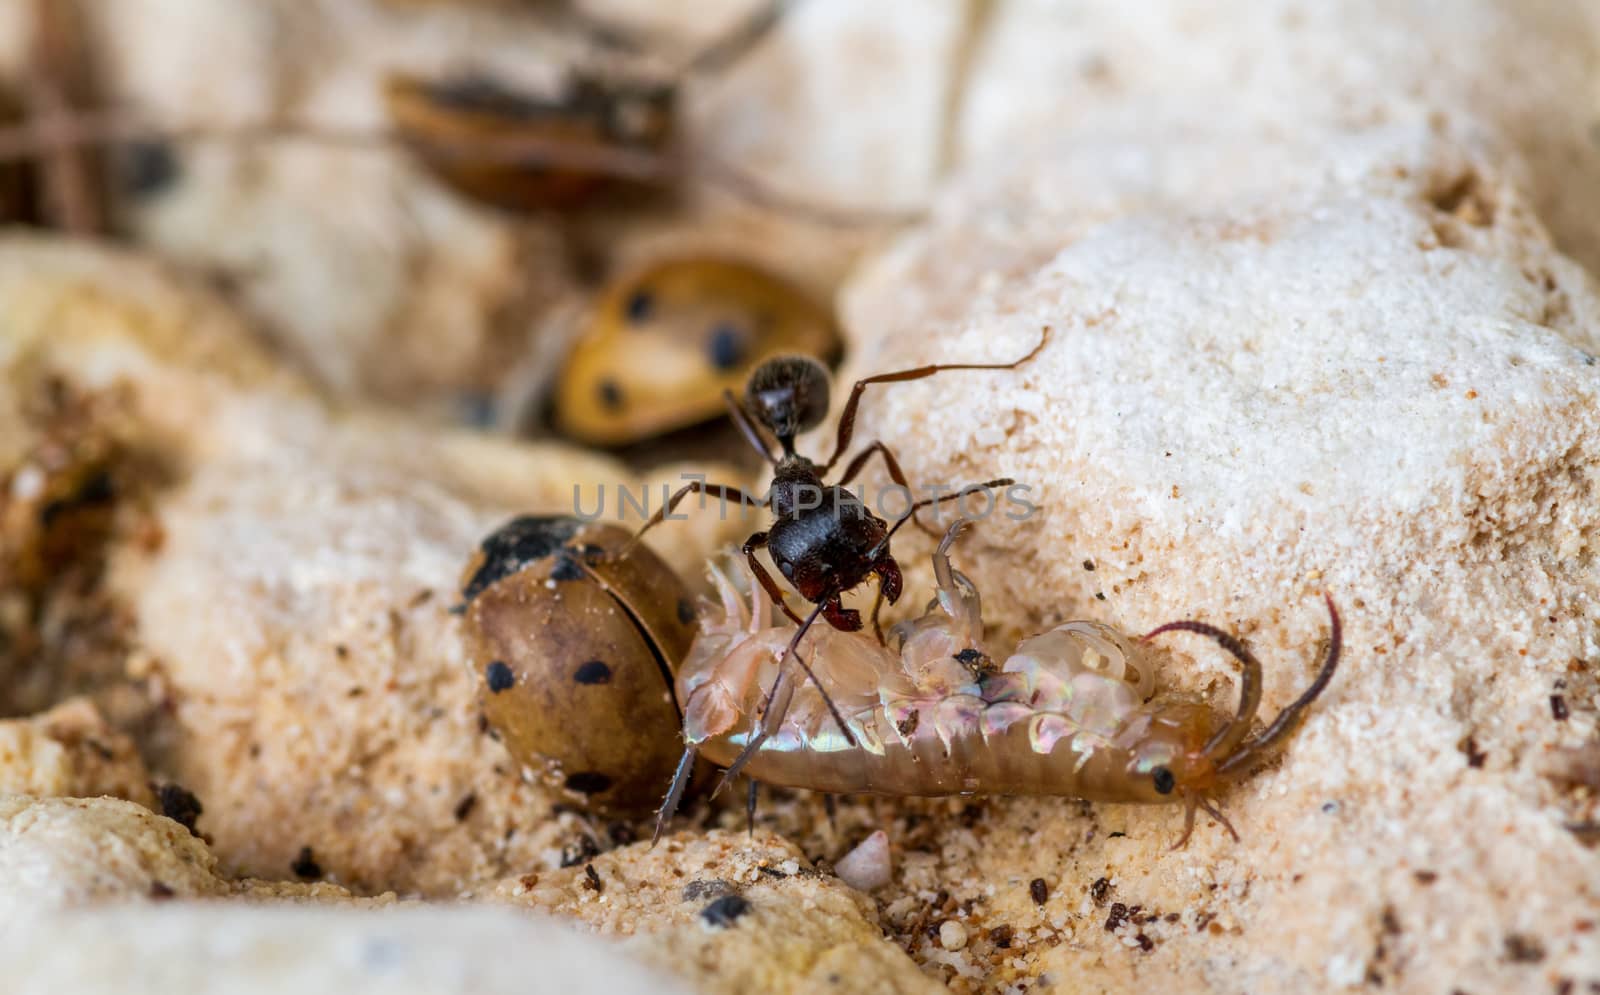 hard-working strong black ant drags a dead centipede into an anthill